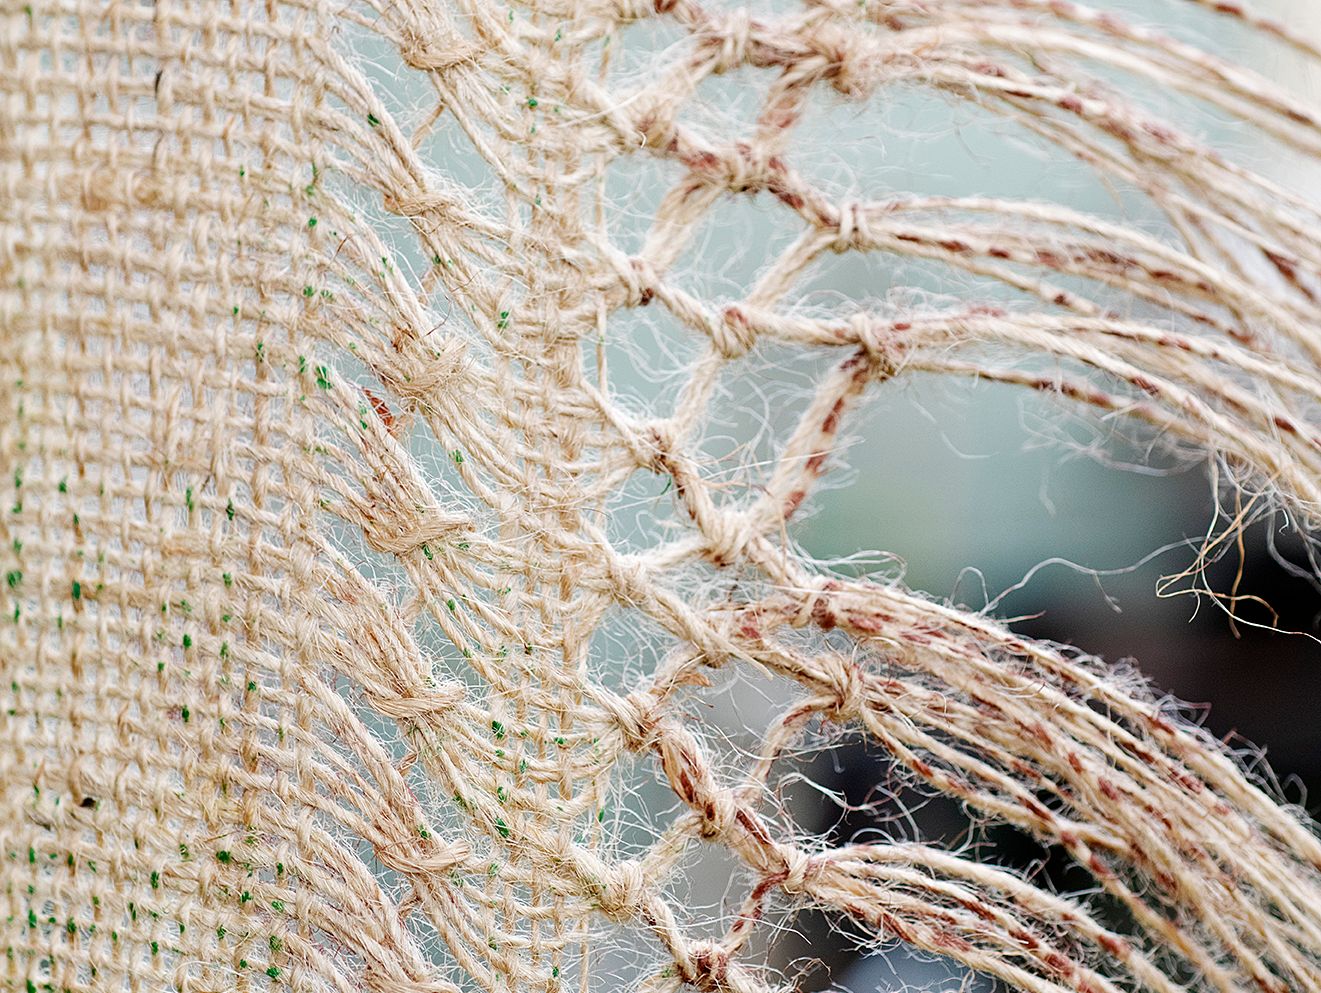 Quishile Charan, Burning Ganna Khet (Burning Sugarcane Farm), 2021, 153cm by 152cm, close up of weaving detail. Technique: hand dyed textile, embroidery thread, cotton, hessian sacks. Textile is naturally dyed with avocado seeds. Image taken by: Raymond Sagapolutele. 